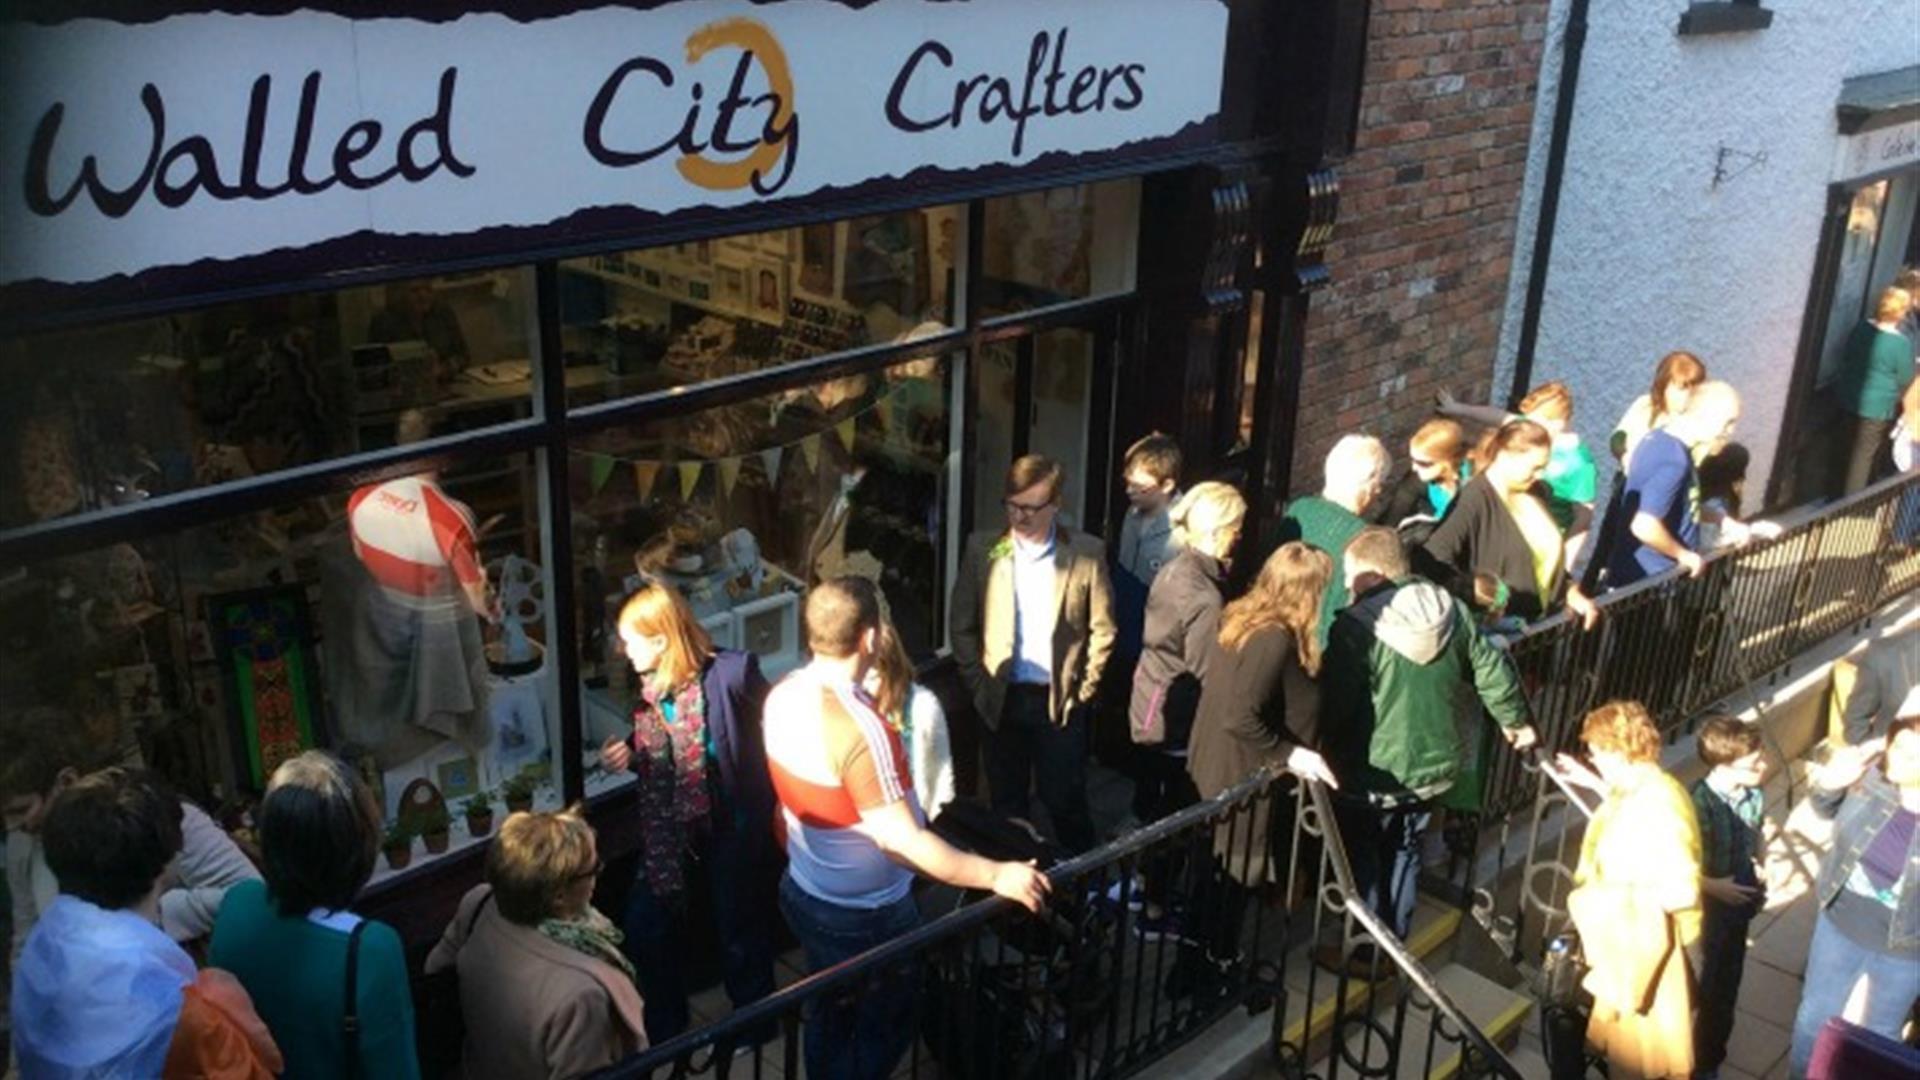 Walled City Crafters